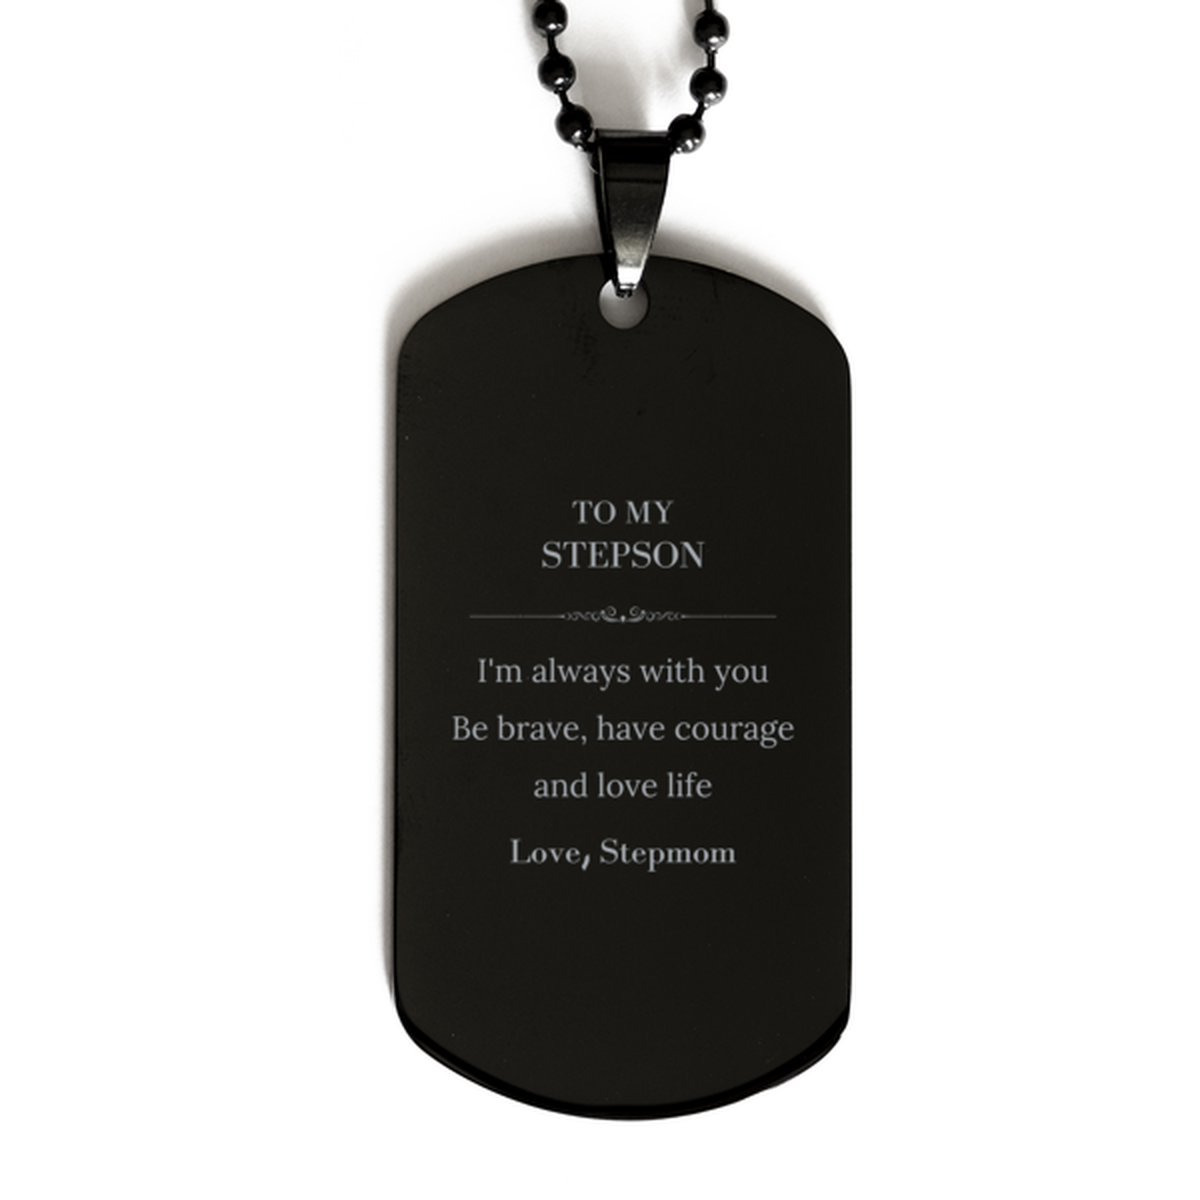 To My Stepson Gifts from Stepmom, Unique Black Dog Tag Inspirational Christmas Birthday Graduation Gifts for Stepson I'm always with you. Be brave, have courage and love life. Love, Stepmom